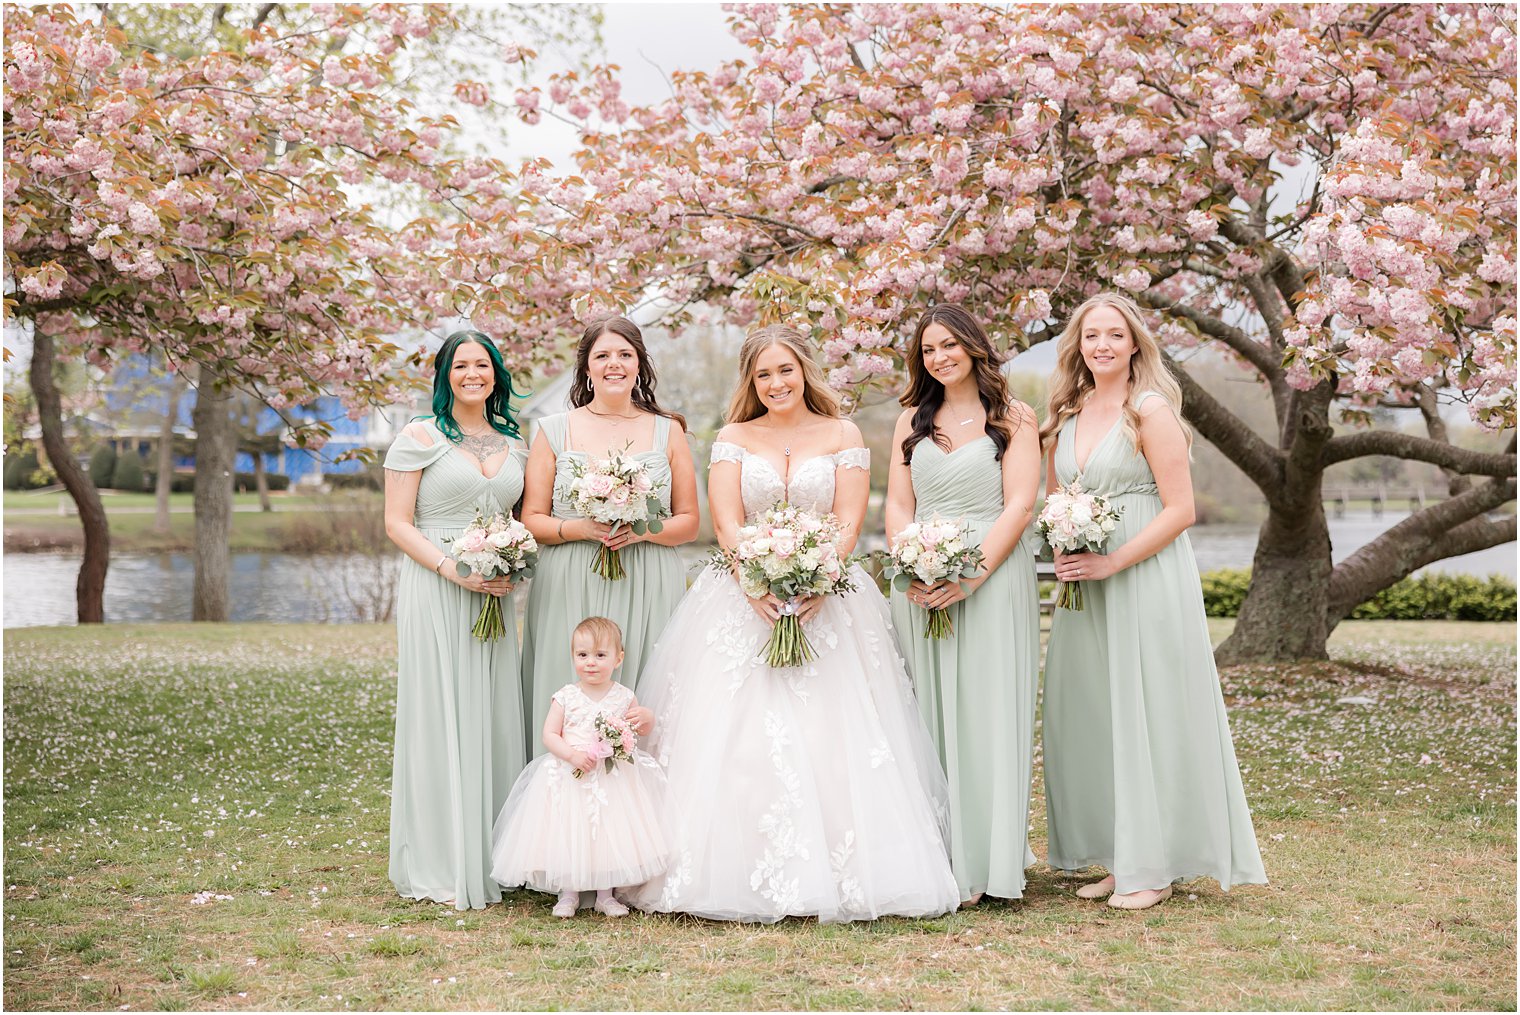 bride poses with bridesmaids in mint green gowns by cherry blossom trees